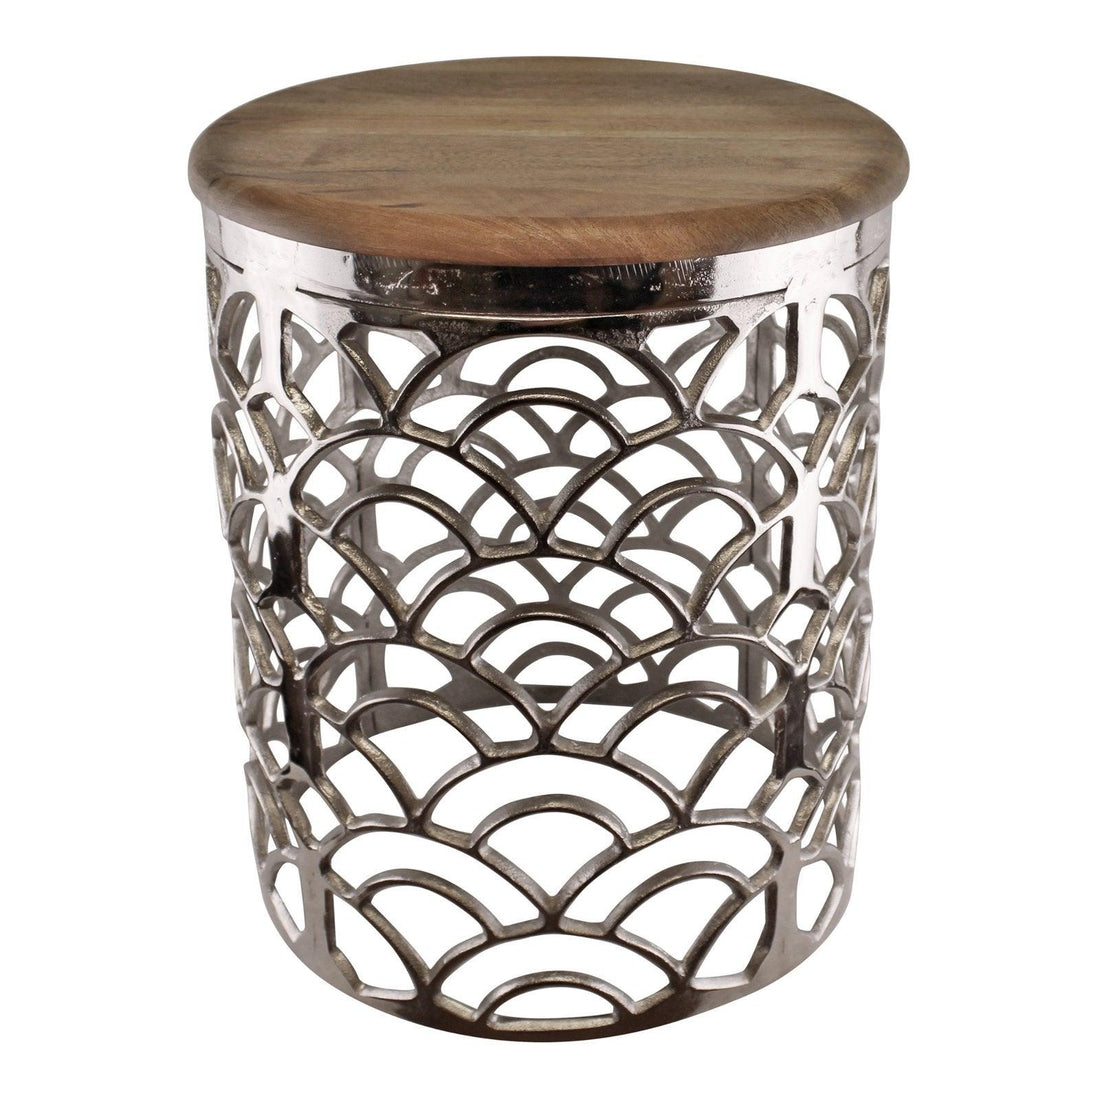 Decorative Silver Metal Side Table With A Wooden Top - £266.99 - Side Tables 